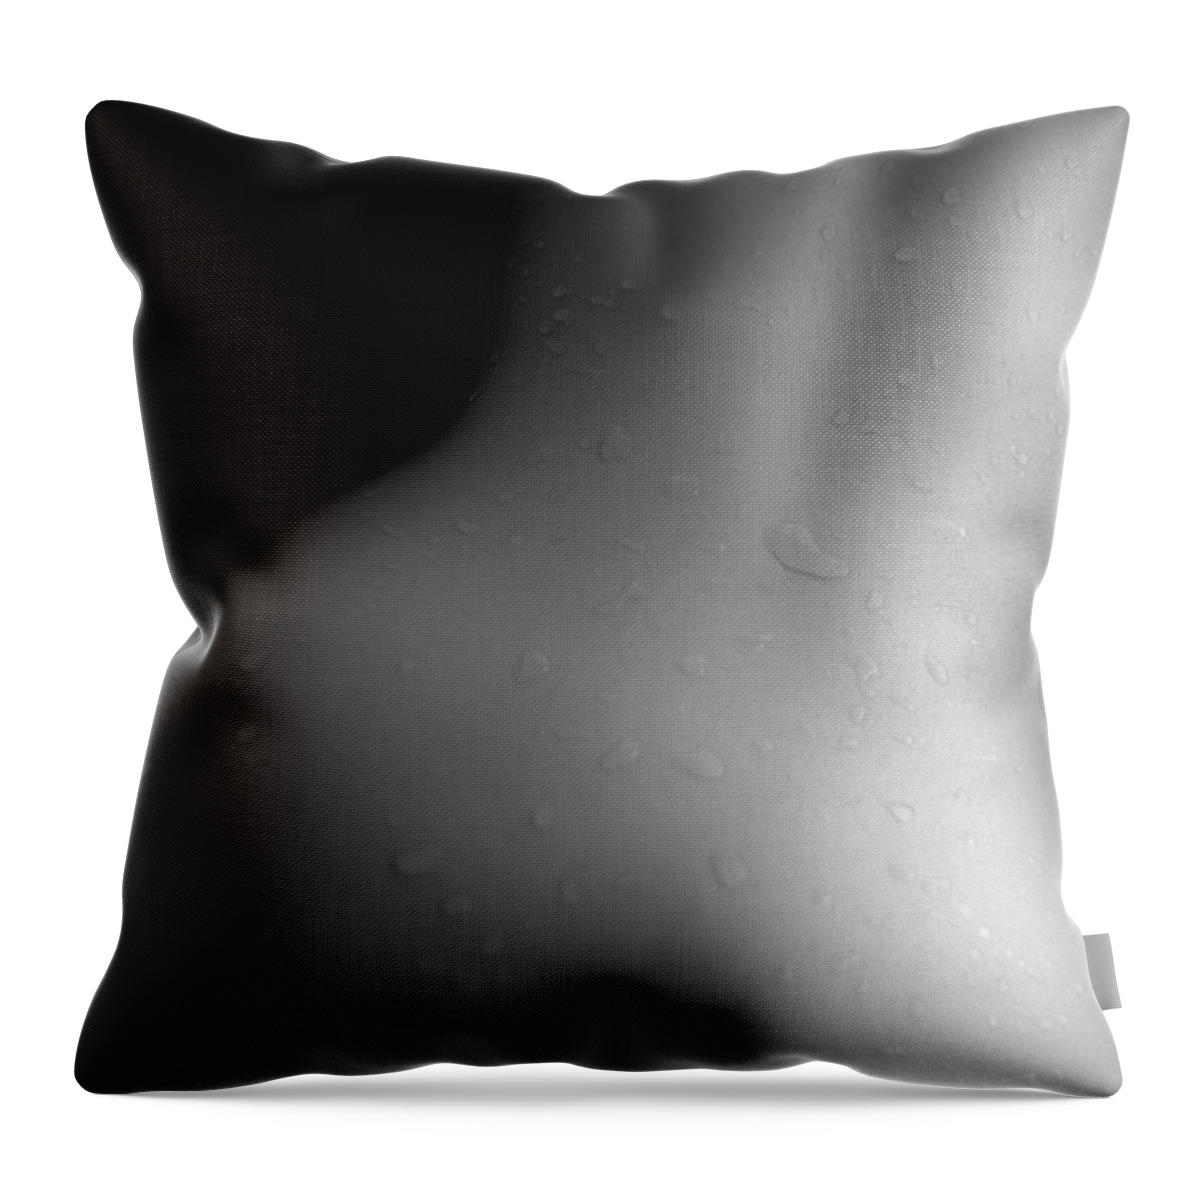 People Throw Pillow featuring the photograph Photography Of A Naked Womans Wet Back by Daj